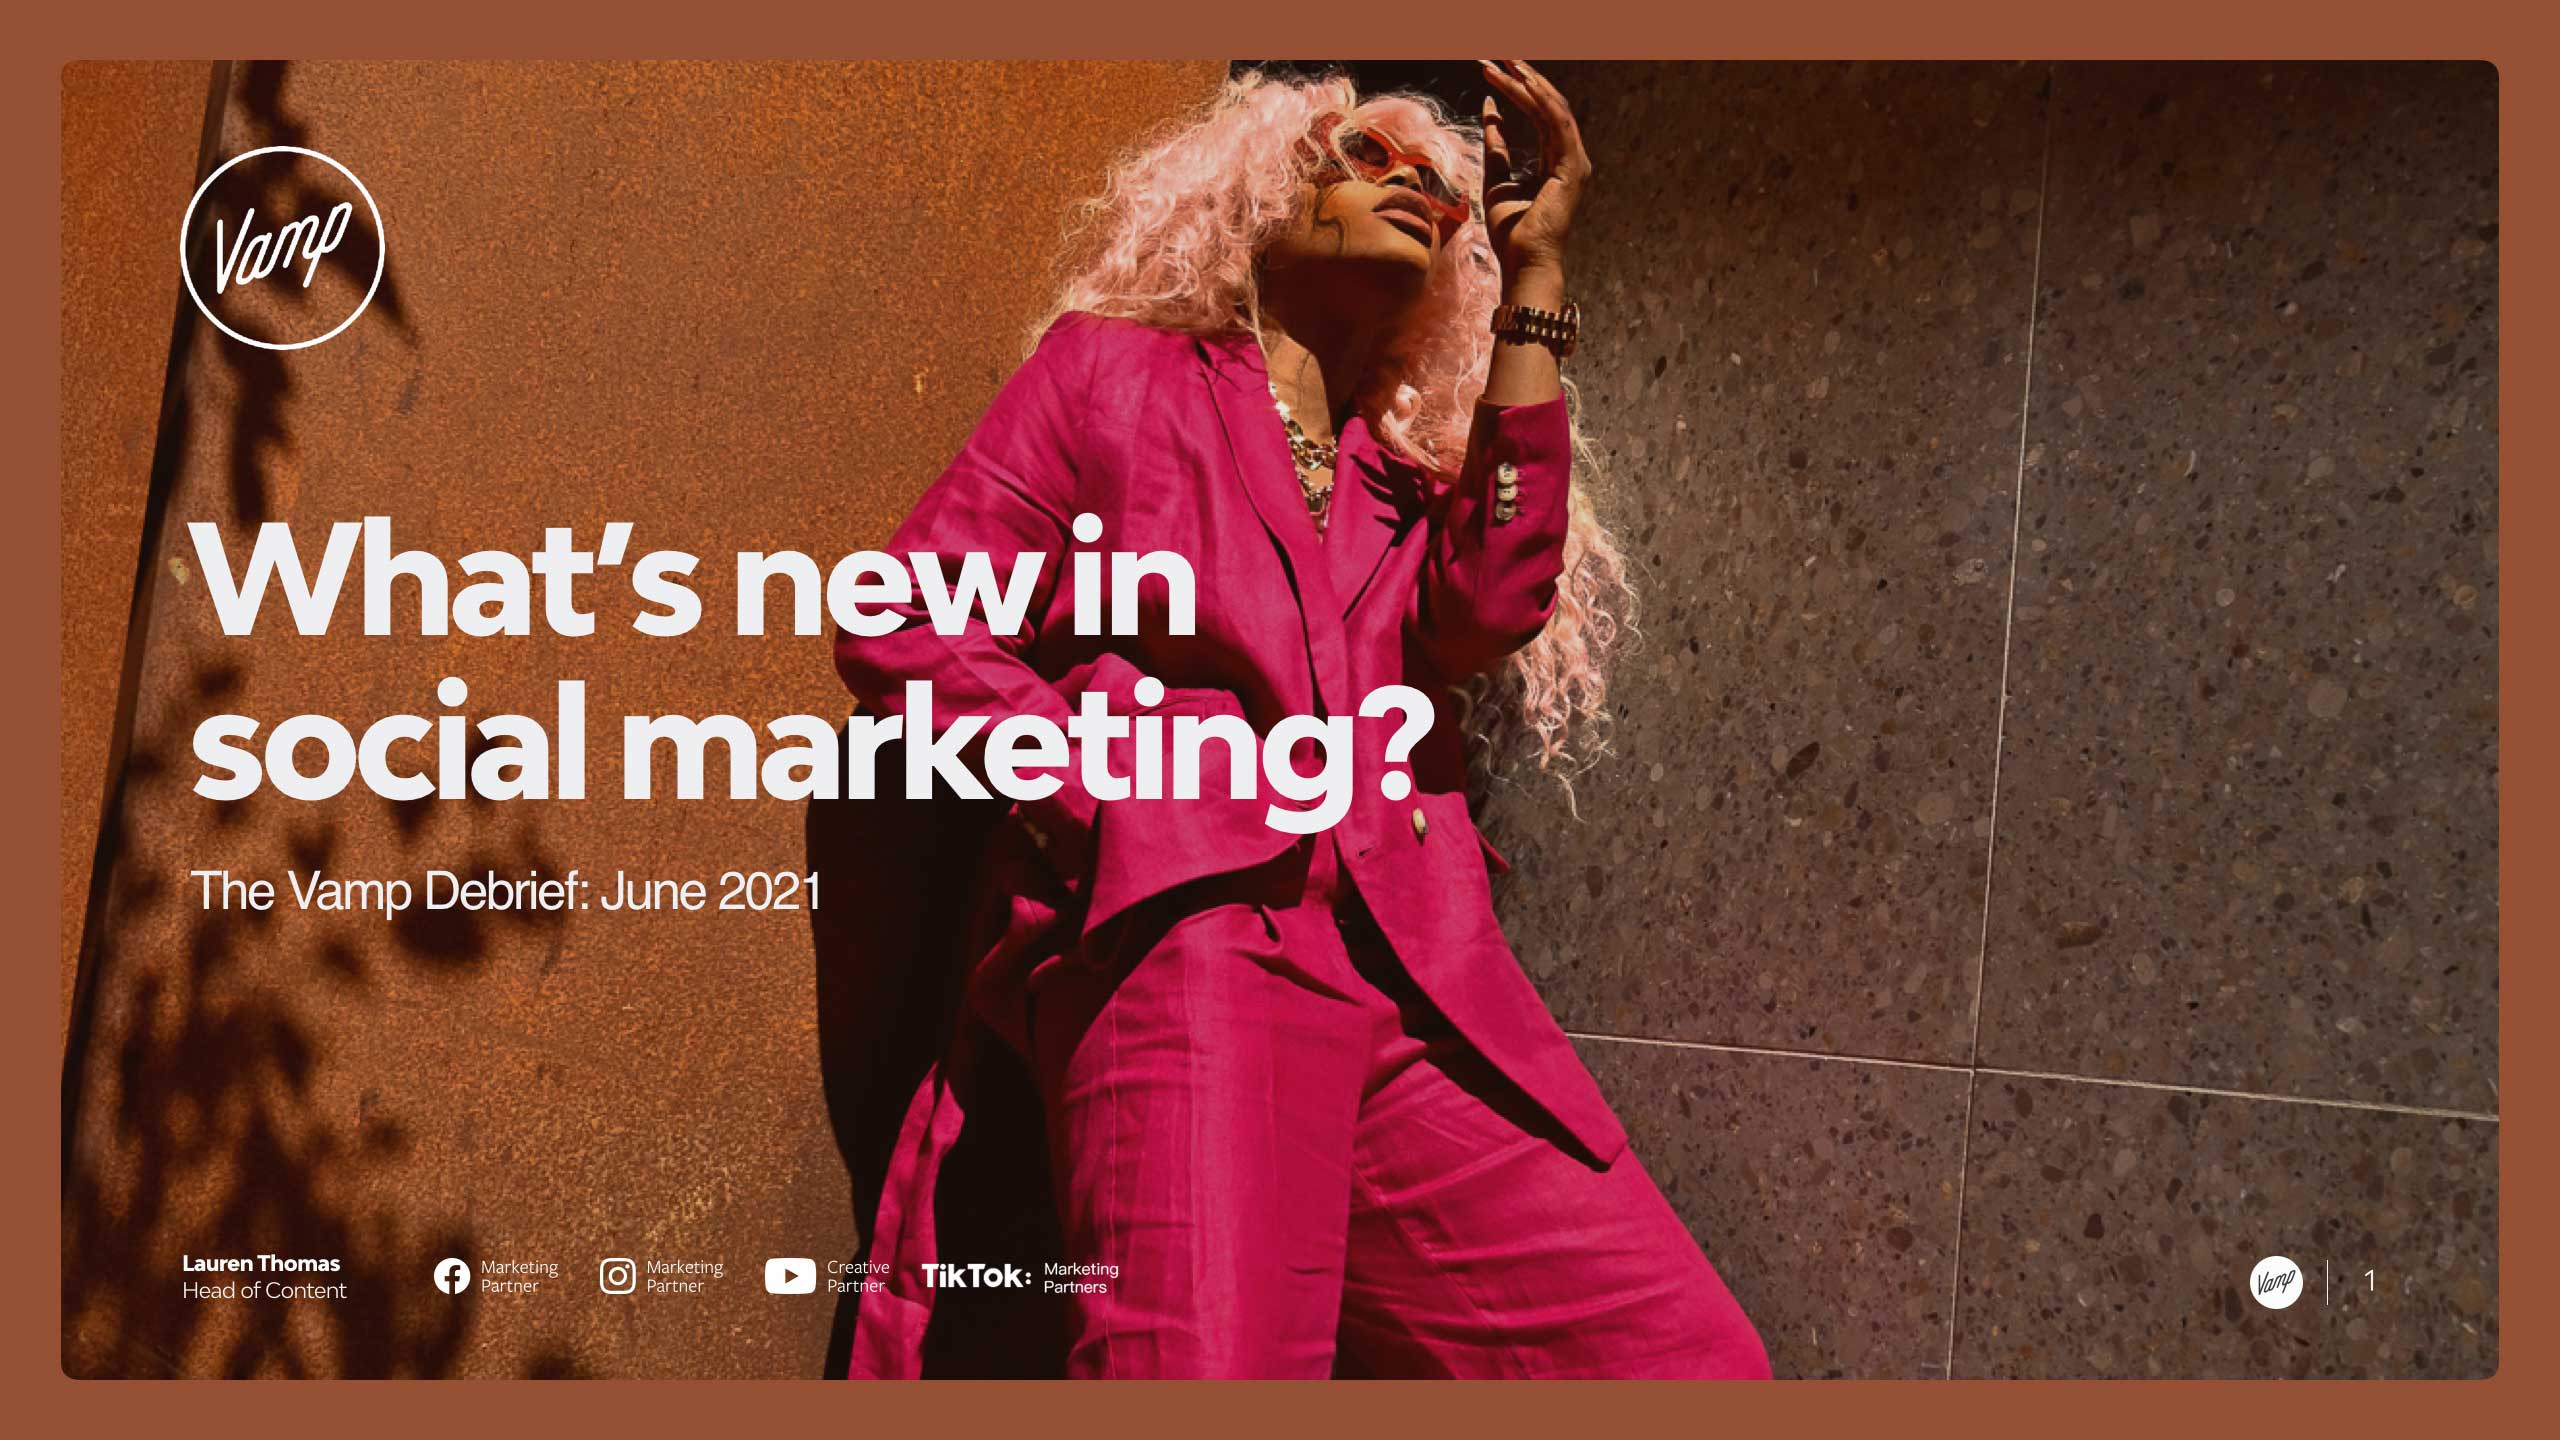 The Vamp Debrief What's new in social marketing this June?